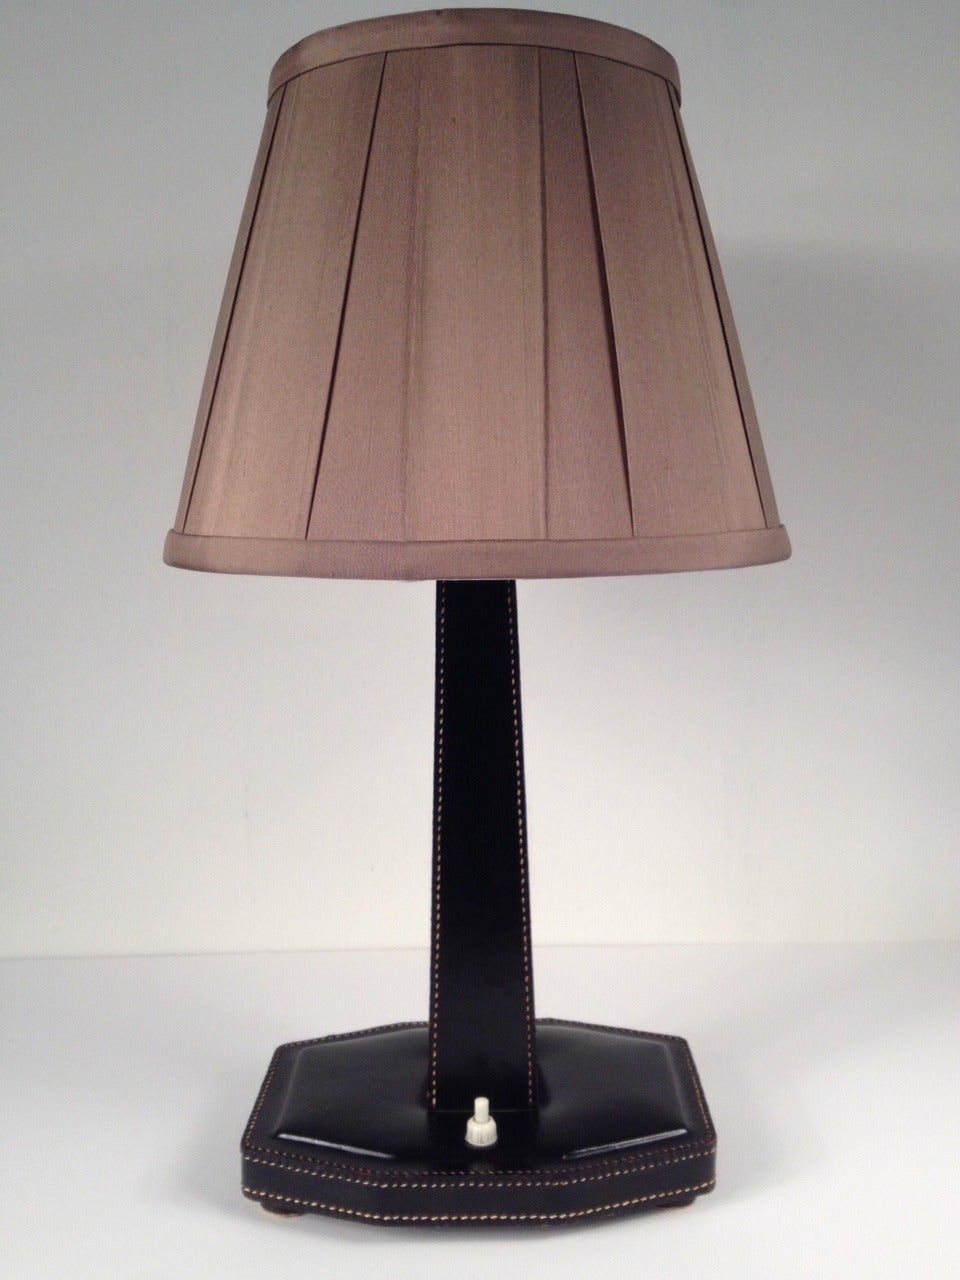 Decorative table lamp by Jacques Adnet for Hermès, France, 1950. This black leather stitched table lamp has a very cool look. The shade isn't original and it's not included. Lamp has been rewired and on dimmer, works perfectly.

Height with